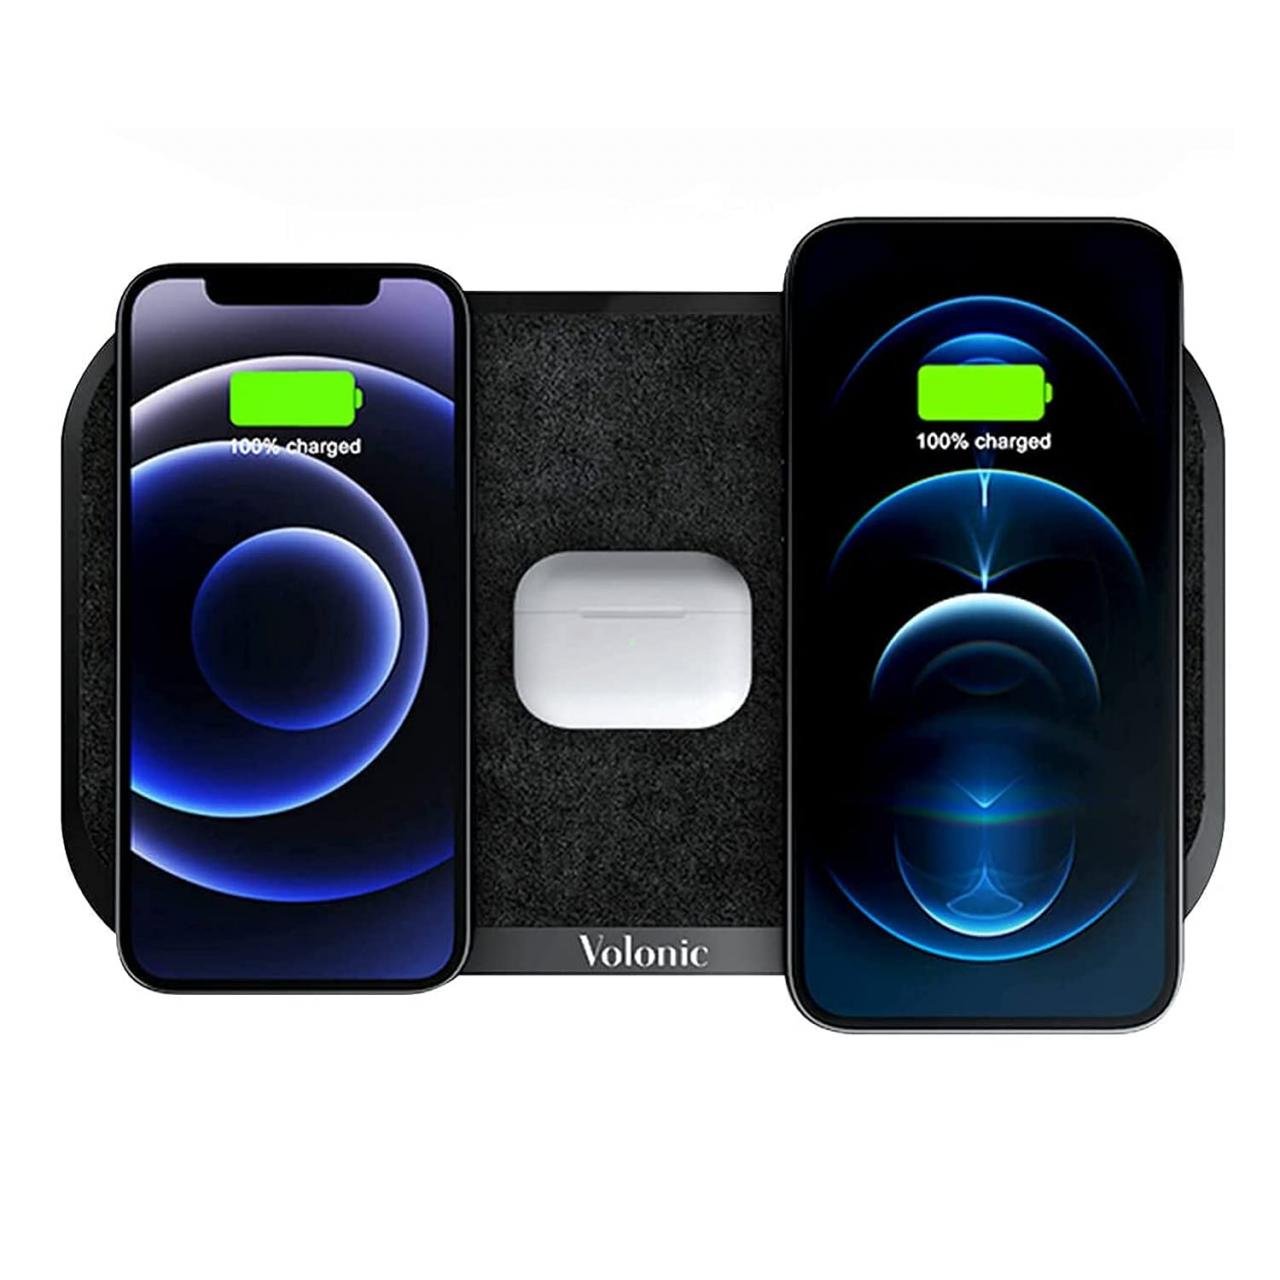 Volonic Valet 3 Luxury Wireless Charger 7.5W Charging Pad For Multiple Qi-Enabled Devices